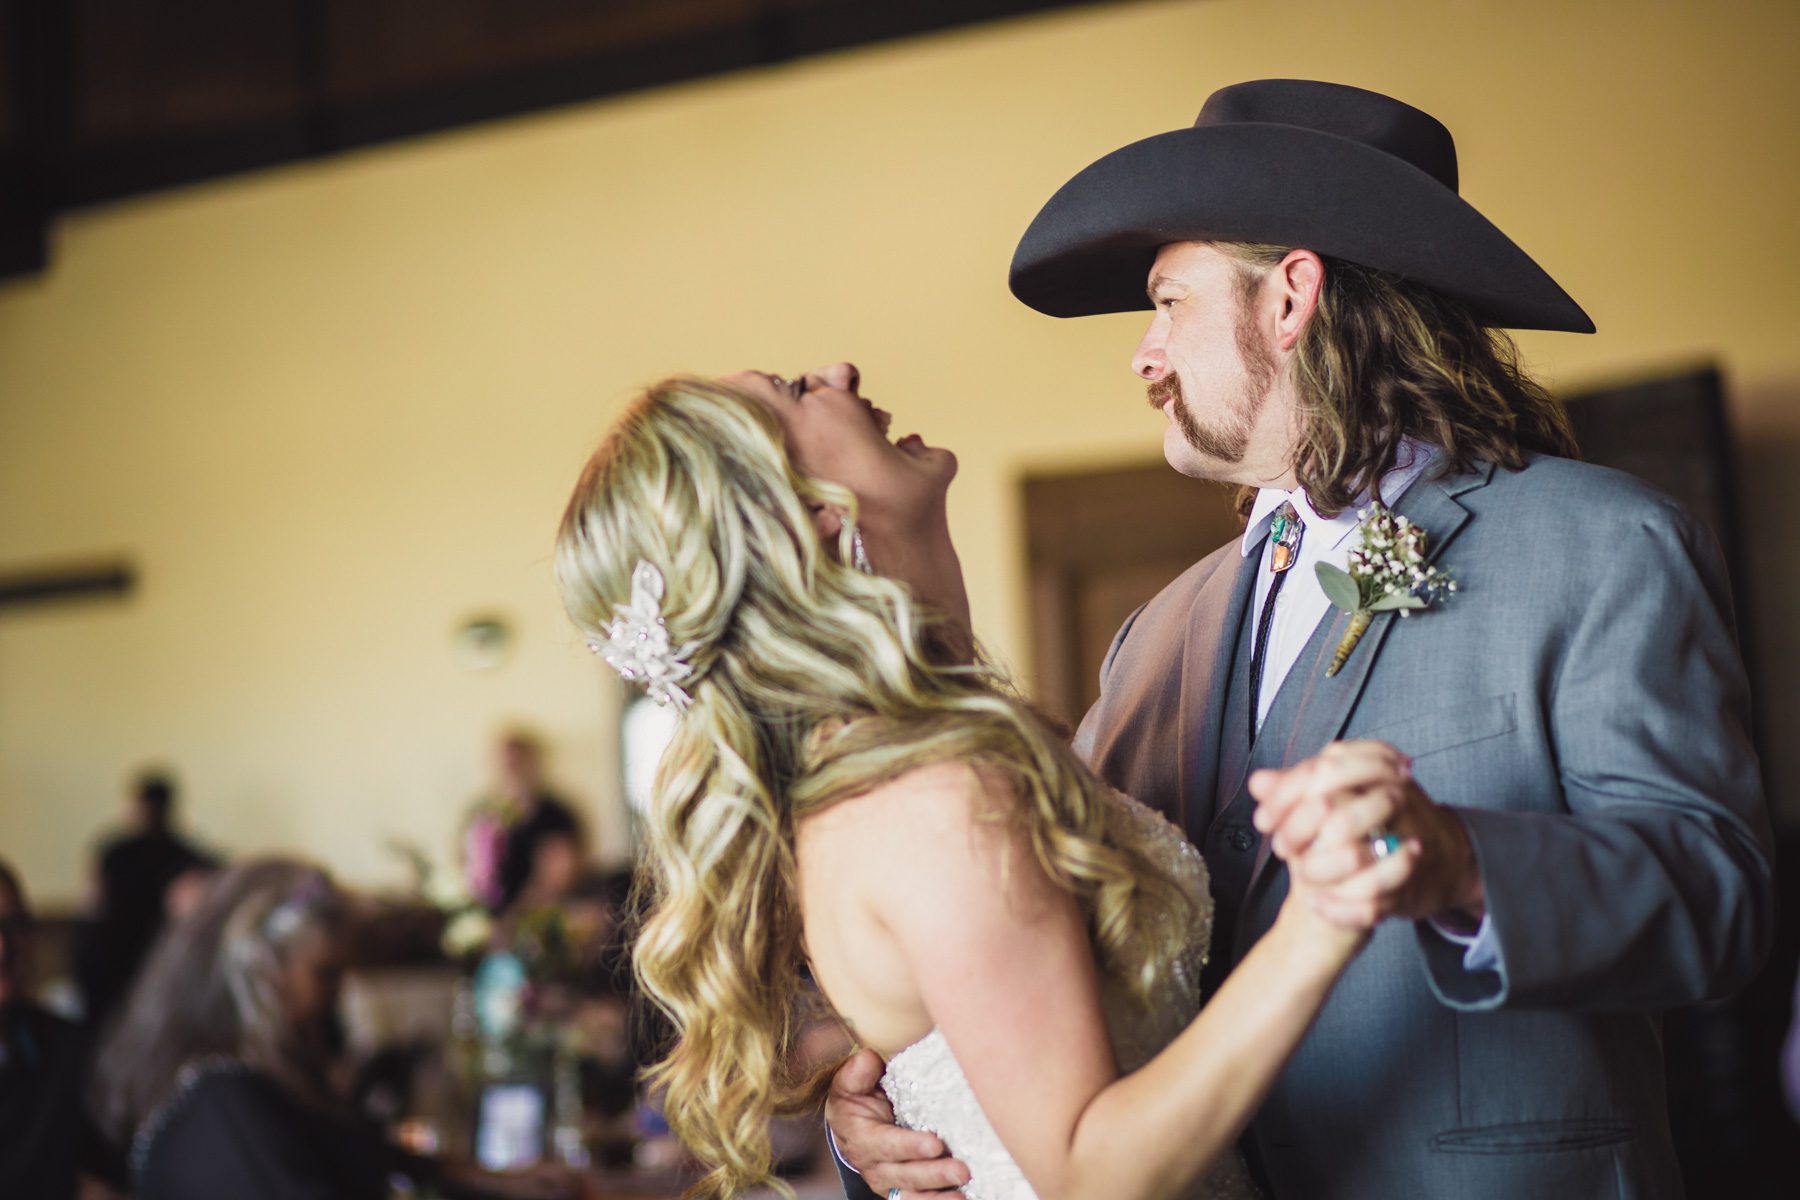 bride and groom first dance reception Old Glory Distilling Co. Clarksville, TN 